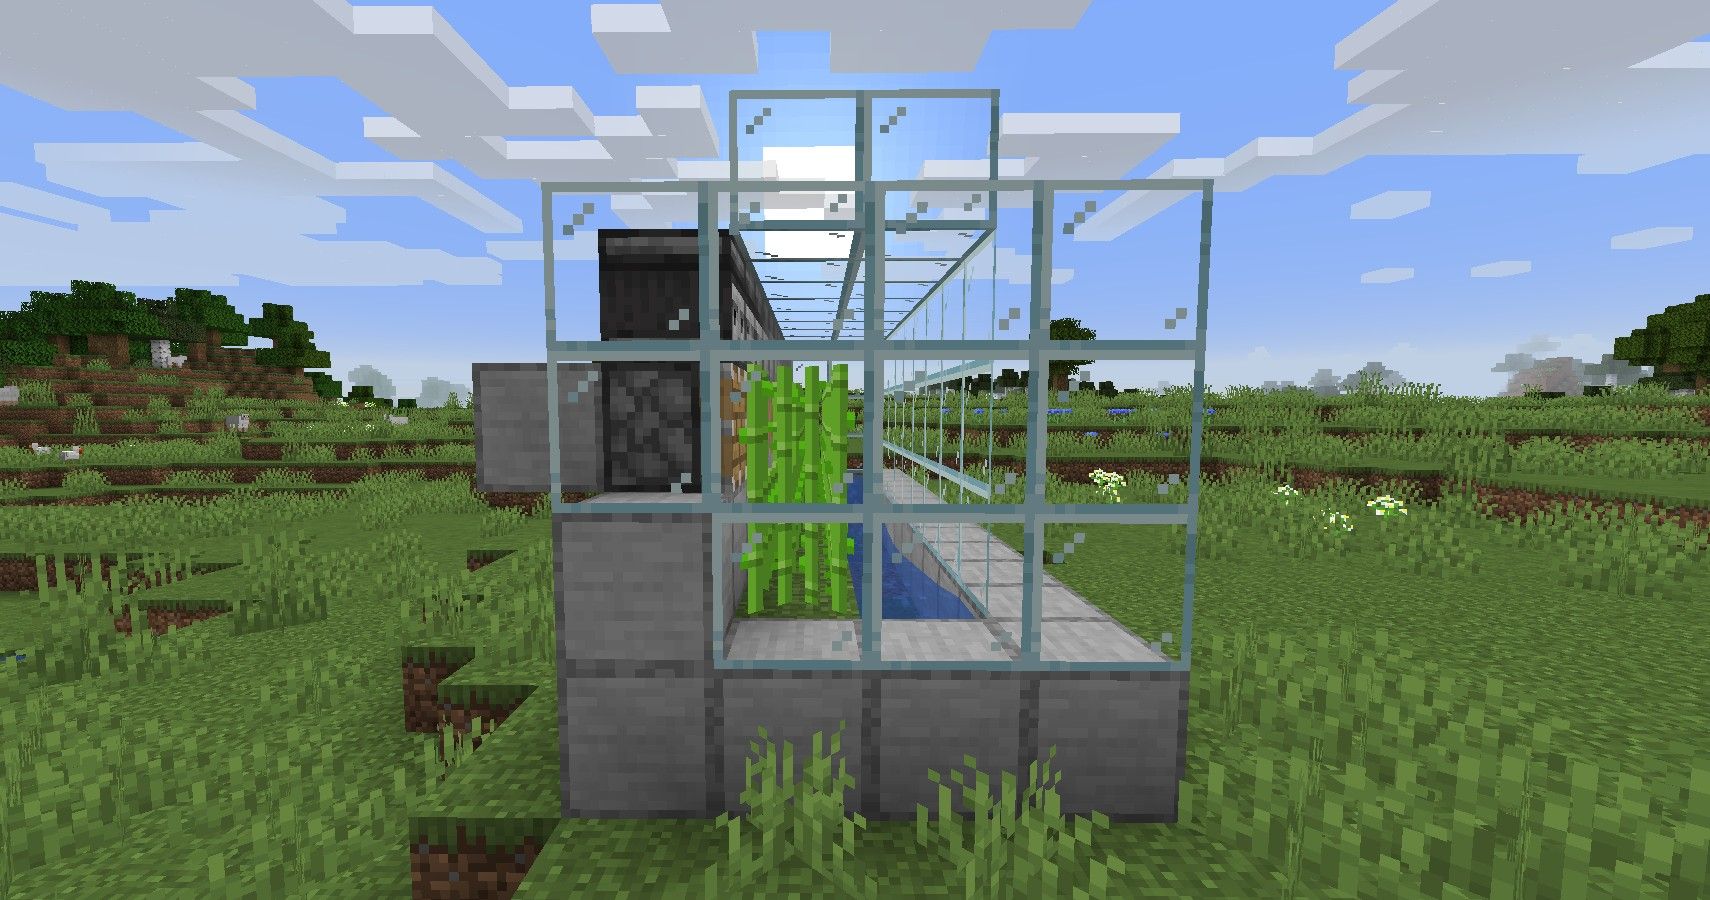 Side View of Minecraft Automatic Sugarcane Farm